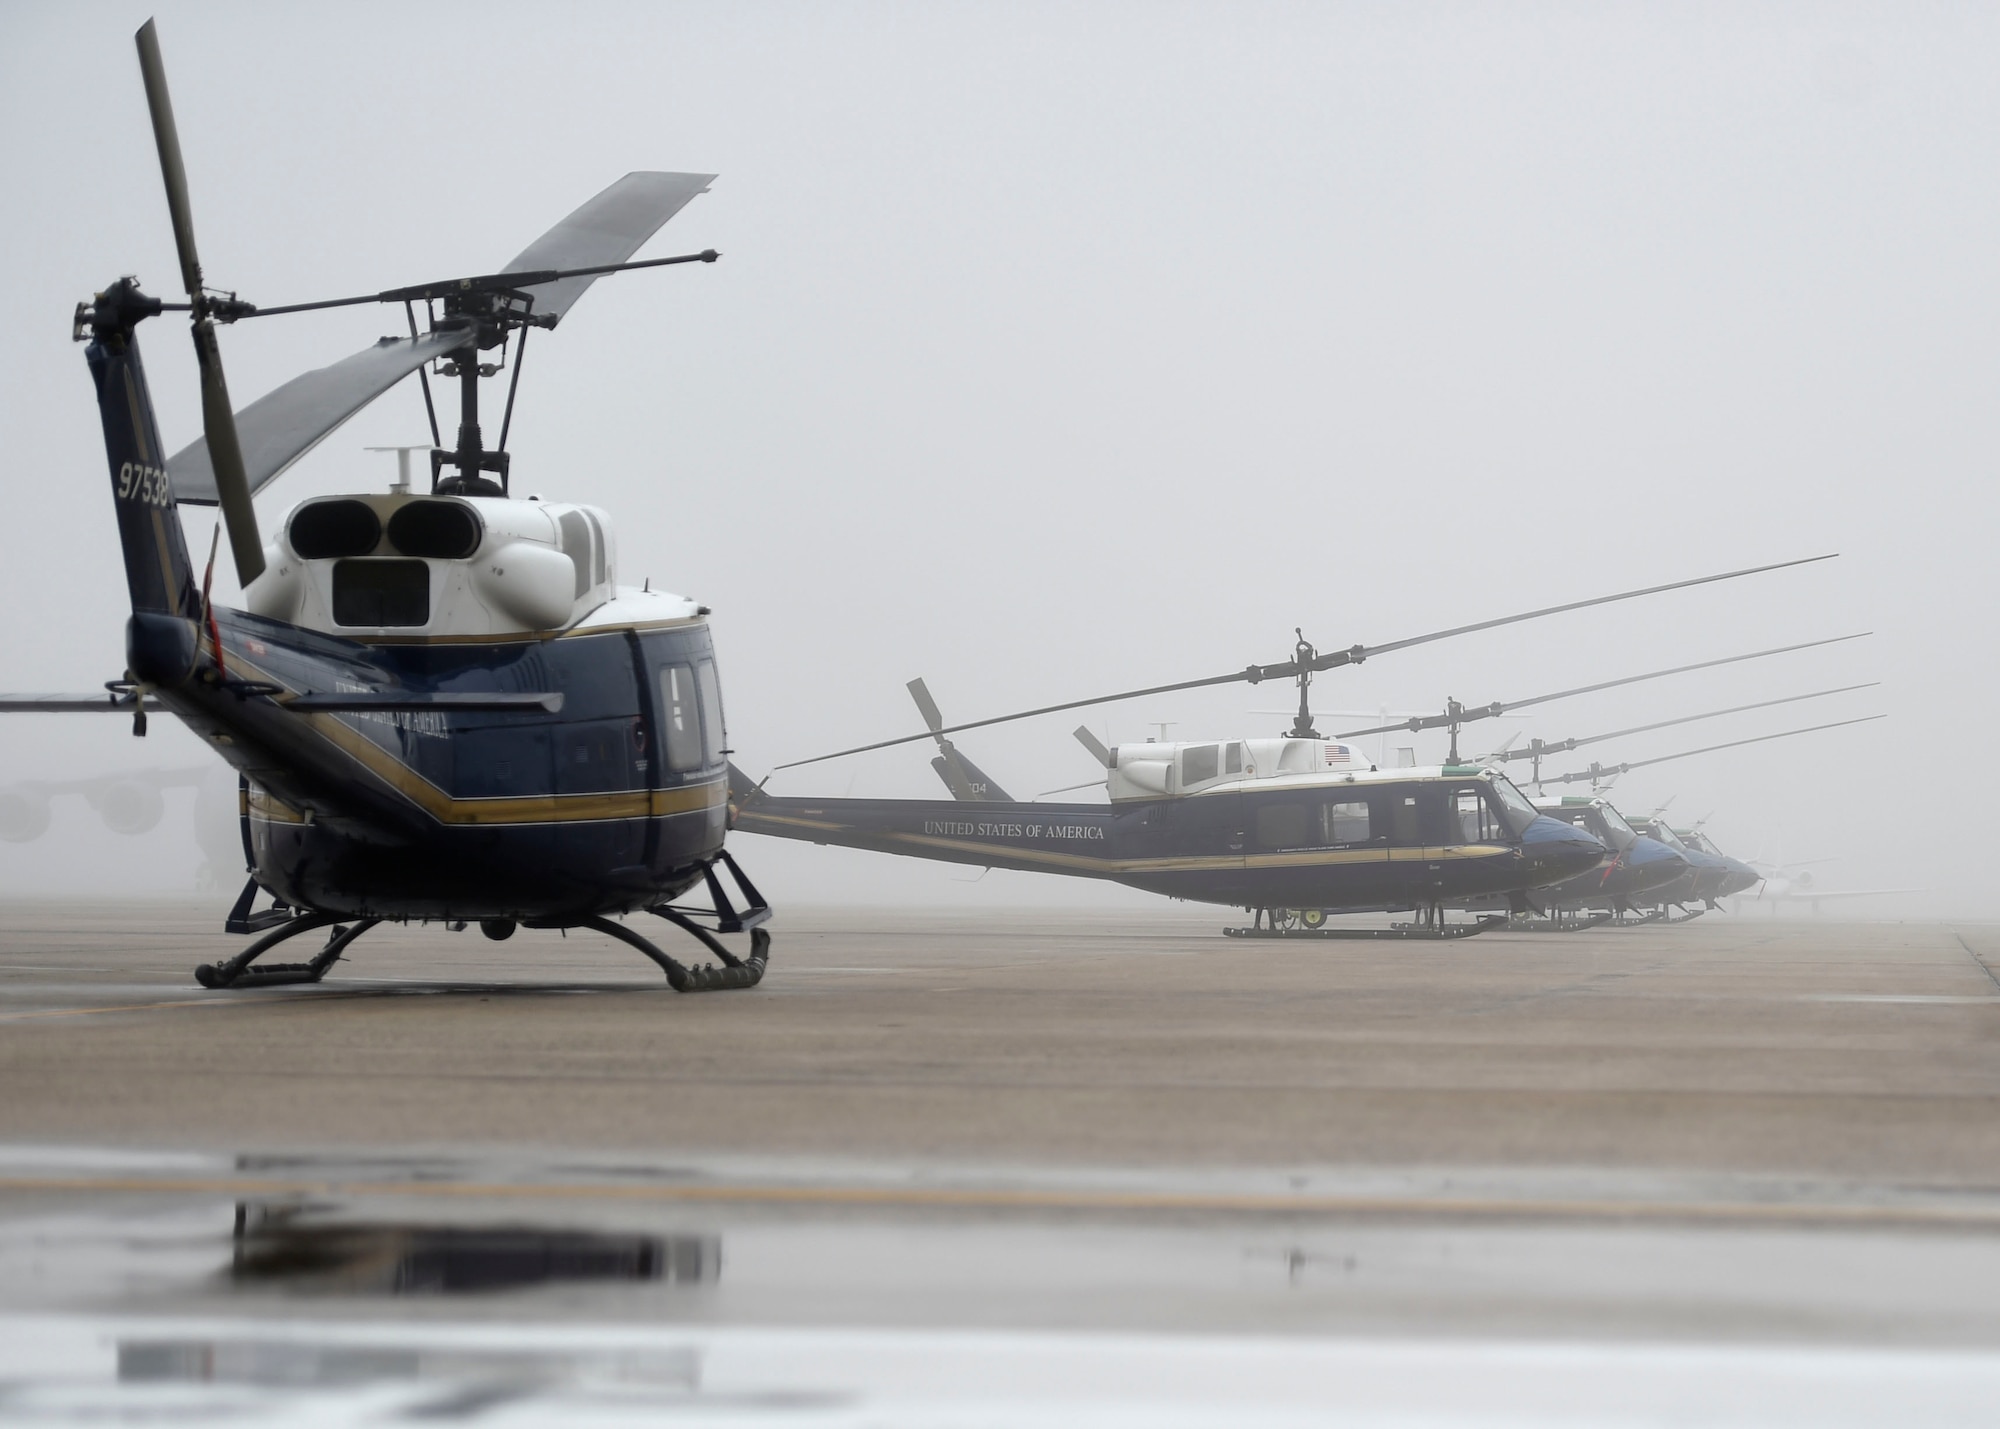 Multiple UH-1N Iroquois “Huey” aircraft from the 1st Helicopter Squadron sit on the flightline at Joint Base Andrews, Md., Dec. 17, 2019. The 1st HS is the Air Force's largest operational helicopter squadron and provides contingency response in the National Capital Region.  (U.S. Air Force photo by Airman 1st Class Spencer Slocum)